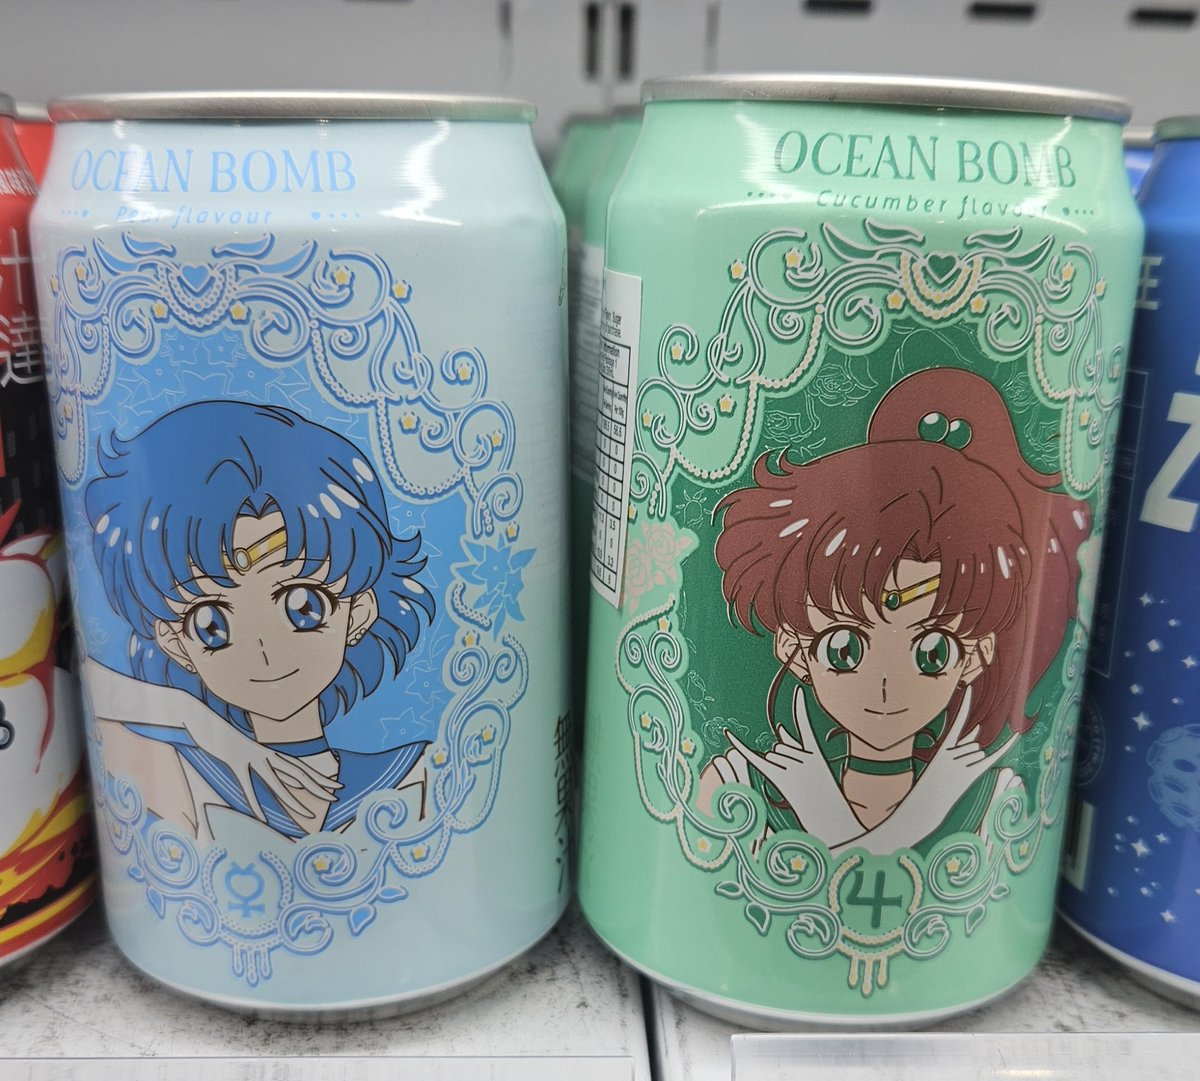 Local Asian grocer has some cute sailor moon canned drinks